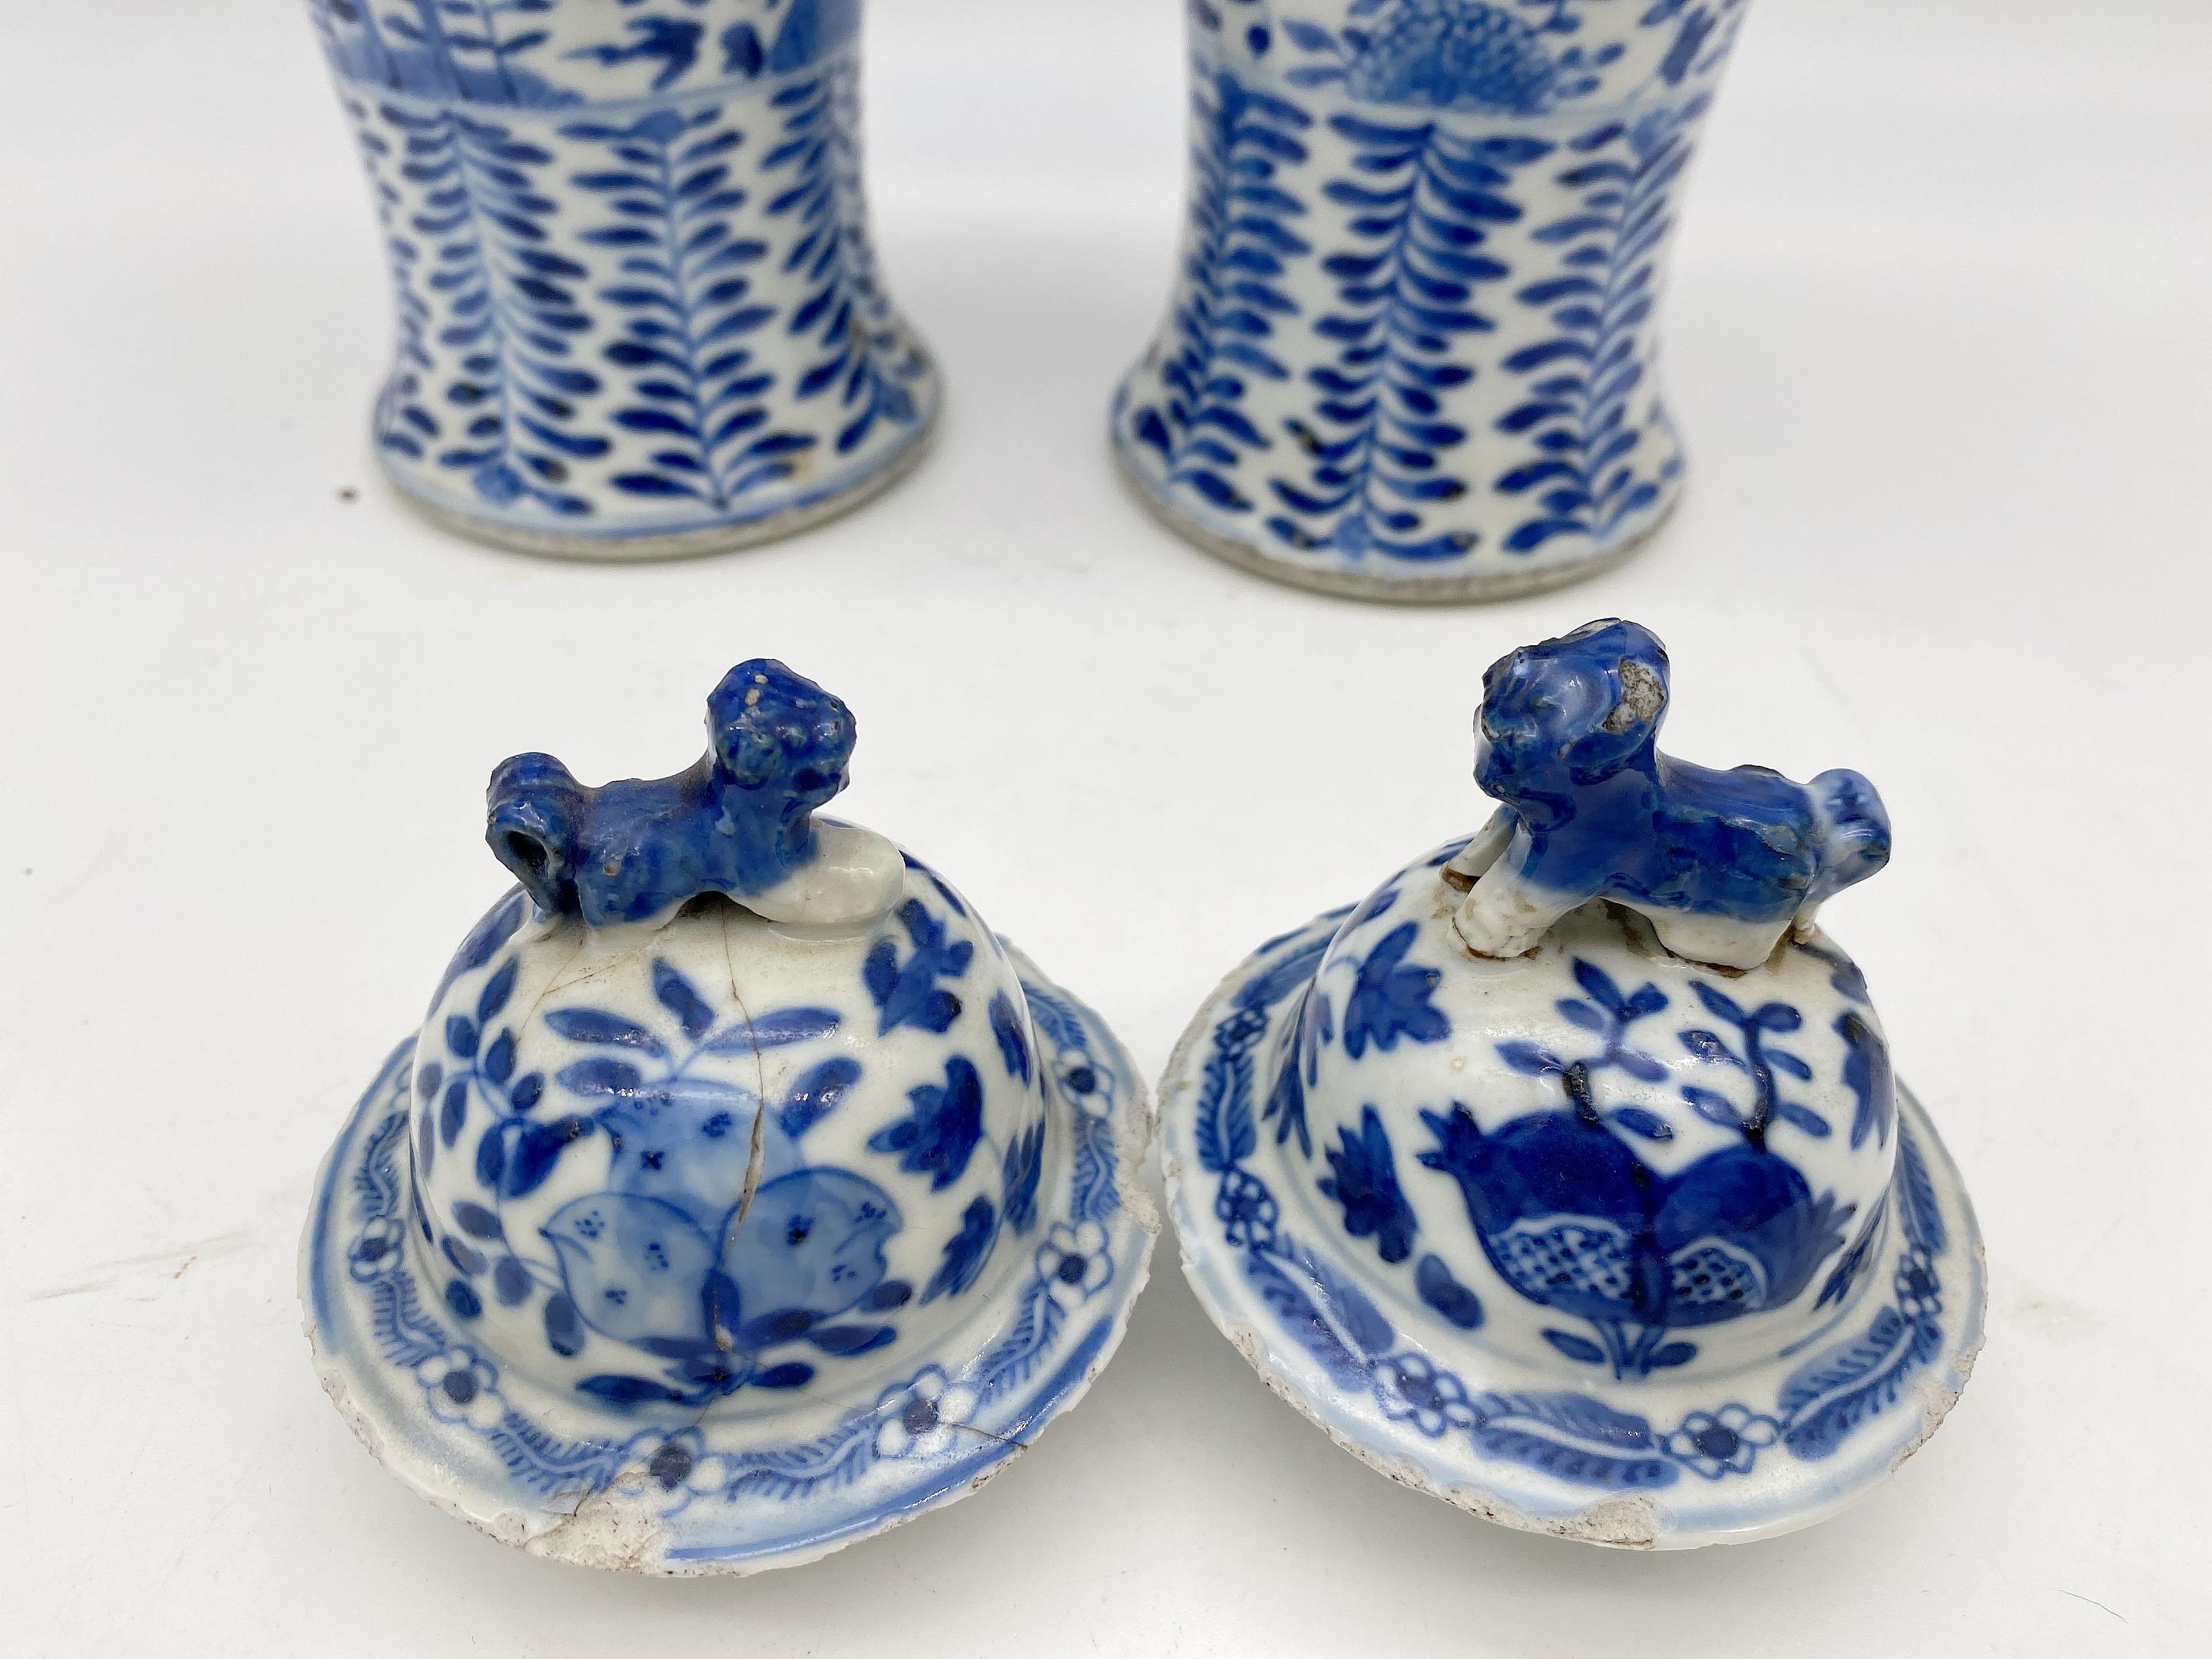 18th Century Antique Pair of Chinese Blue and White Porcelain Jars and Covers For Sale 7